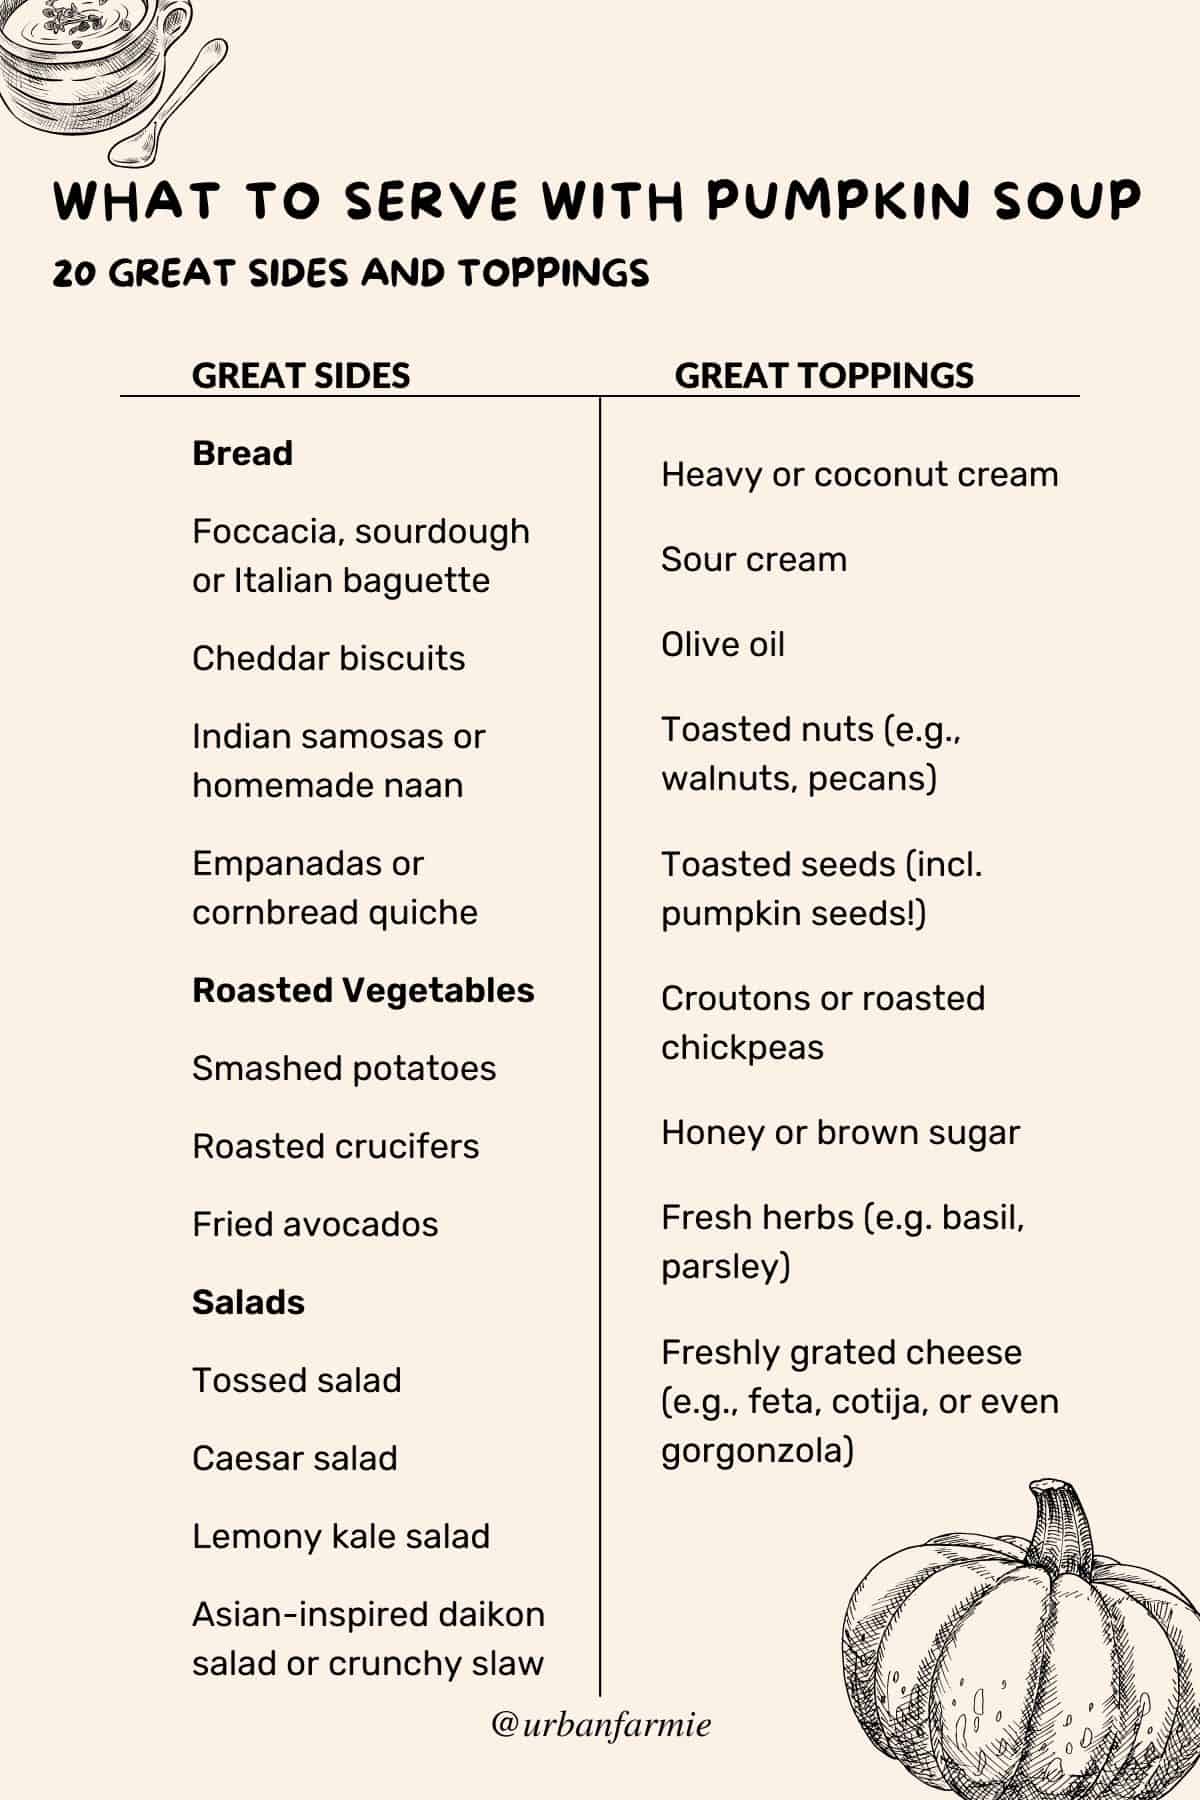 Infographic listing the 20 sides and toppings - check post for details!